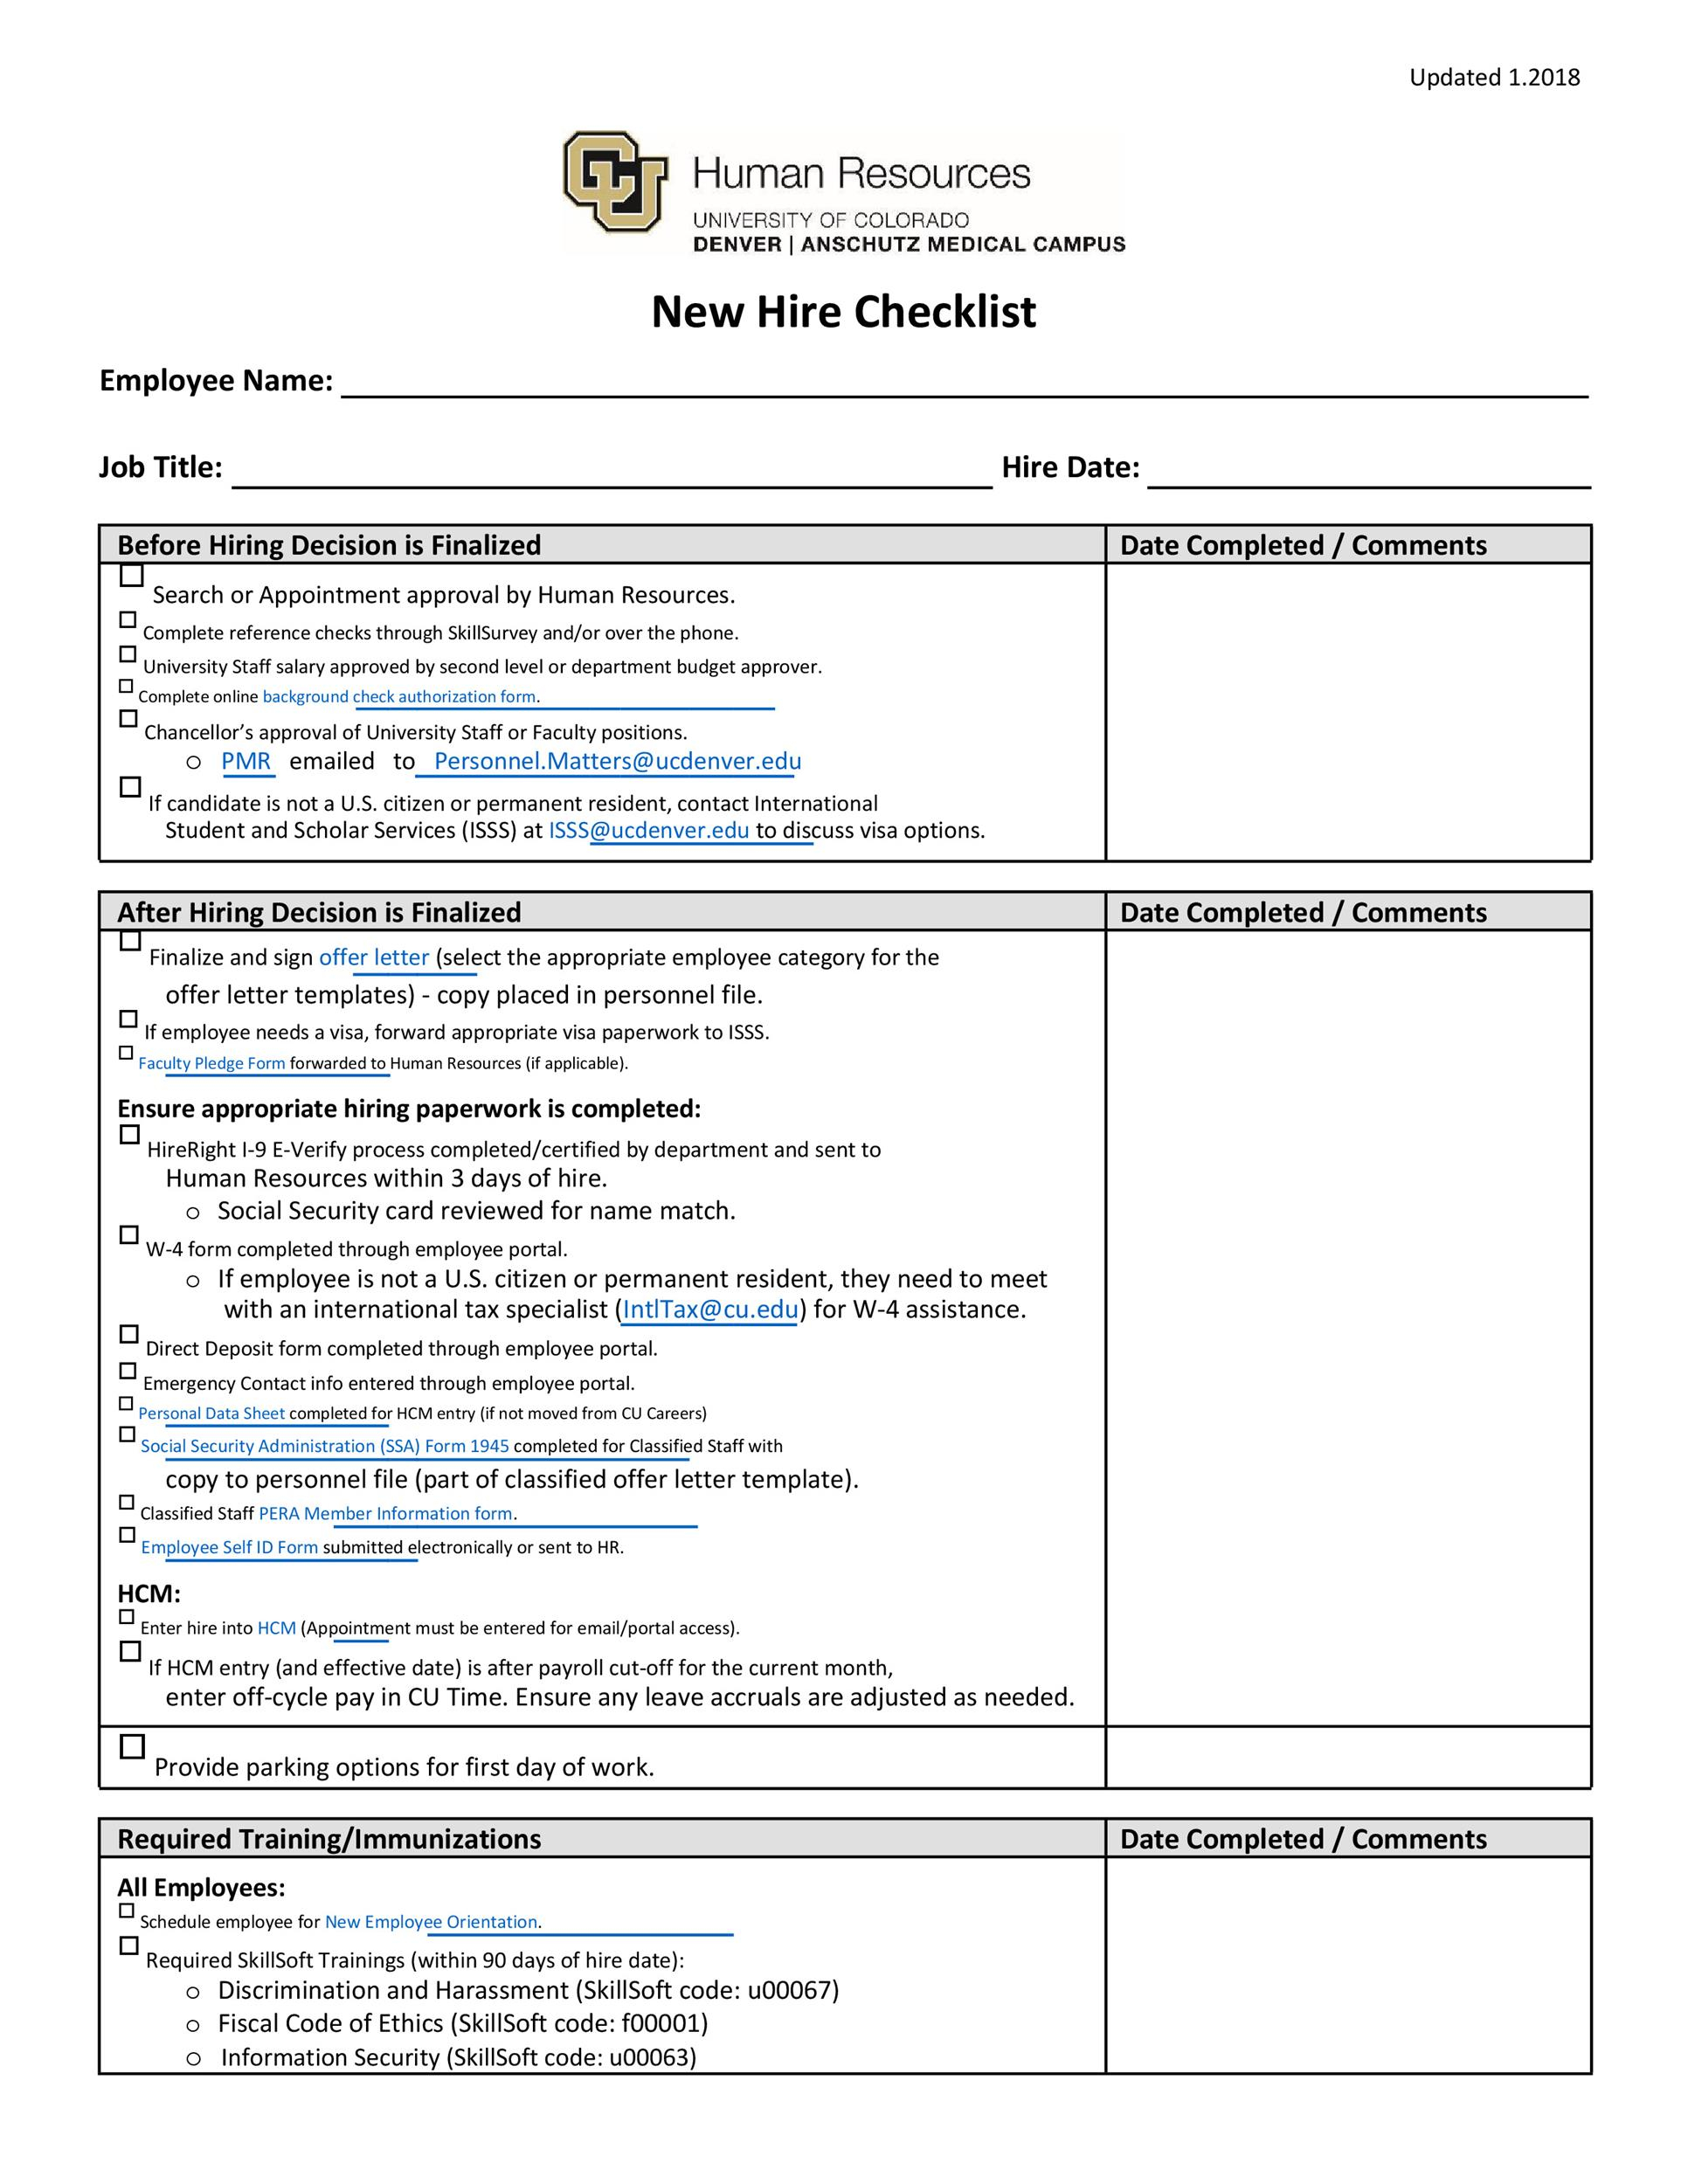 10 Useful New Hire Checklist Templates & Forms ᐅ TemplateLab Within It New Hire Checklist Template